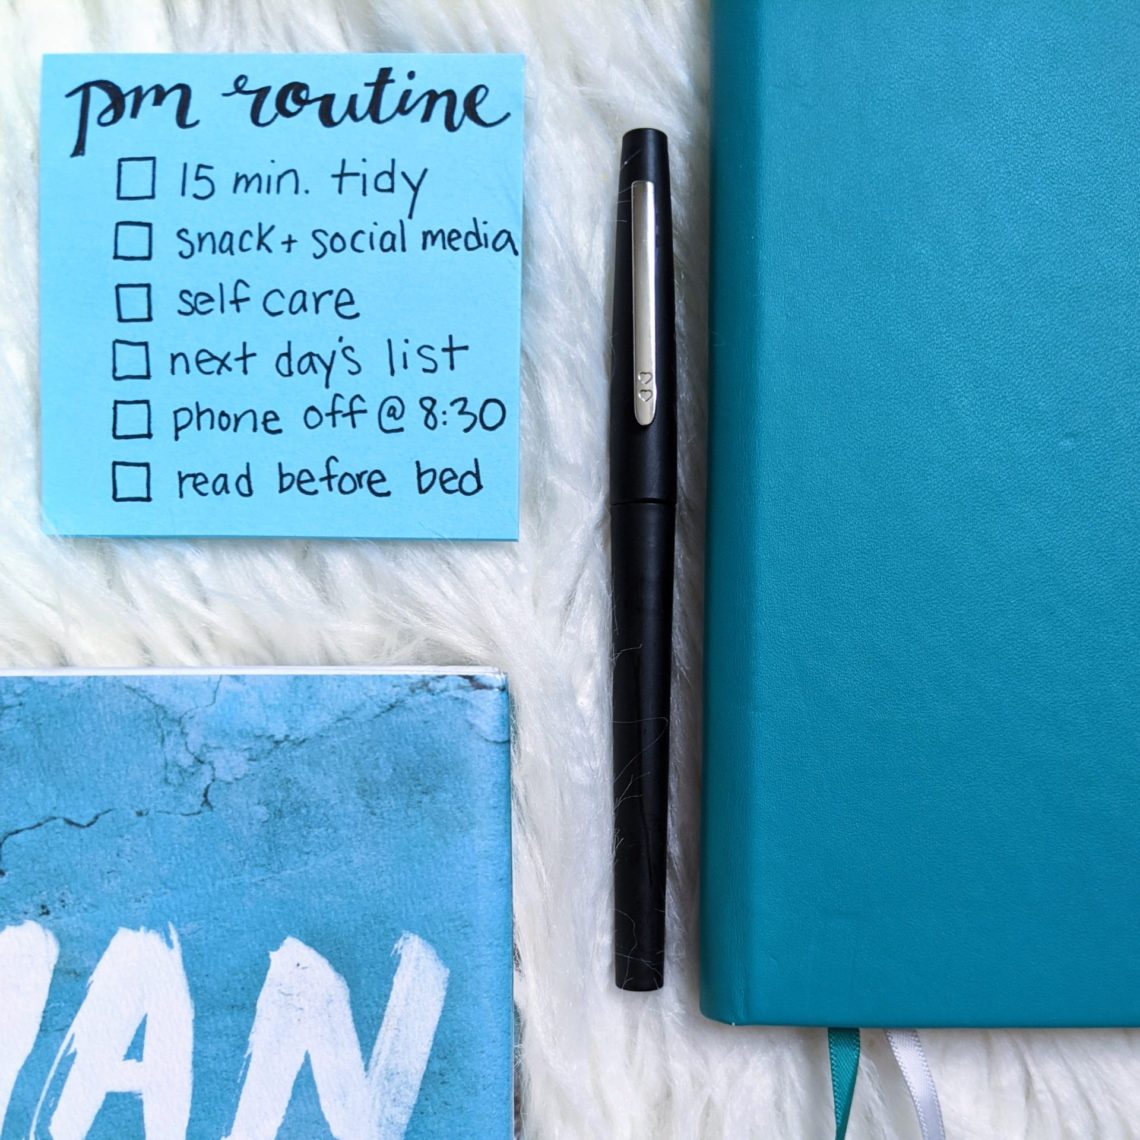 My PM routine- how I created my evening routine and lots of ideas to try! #pmroutine #eveningroutine #nighttimeroutine